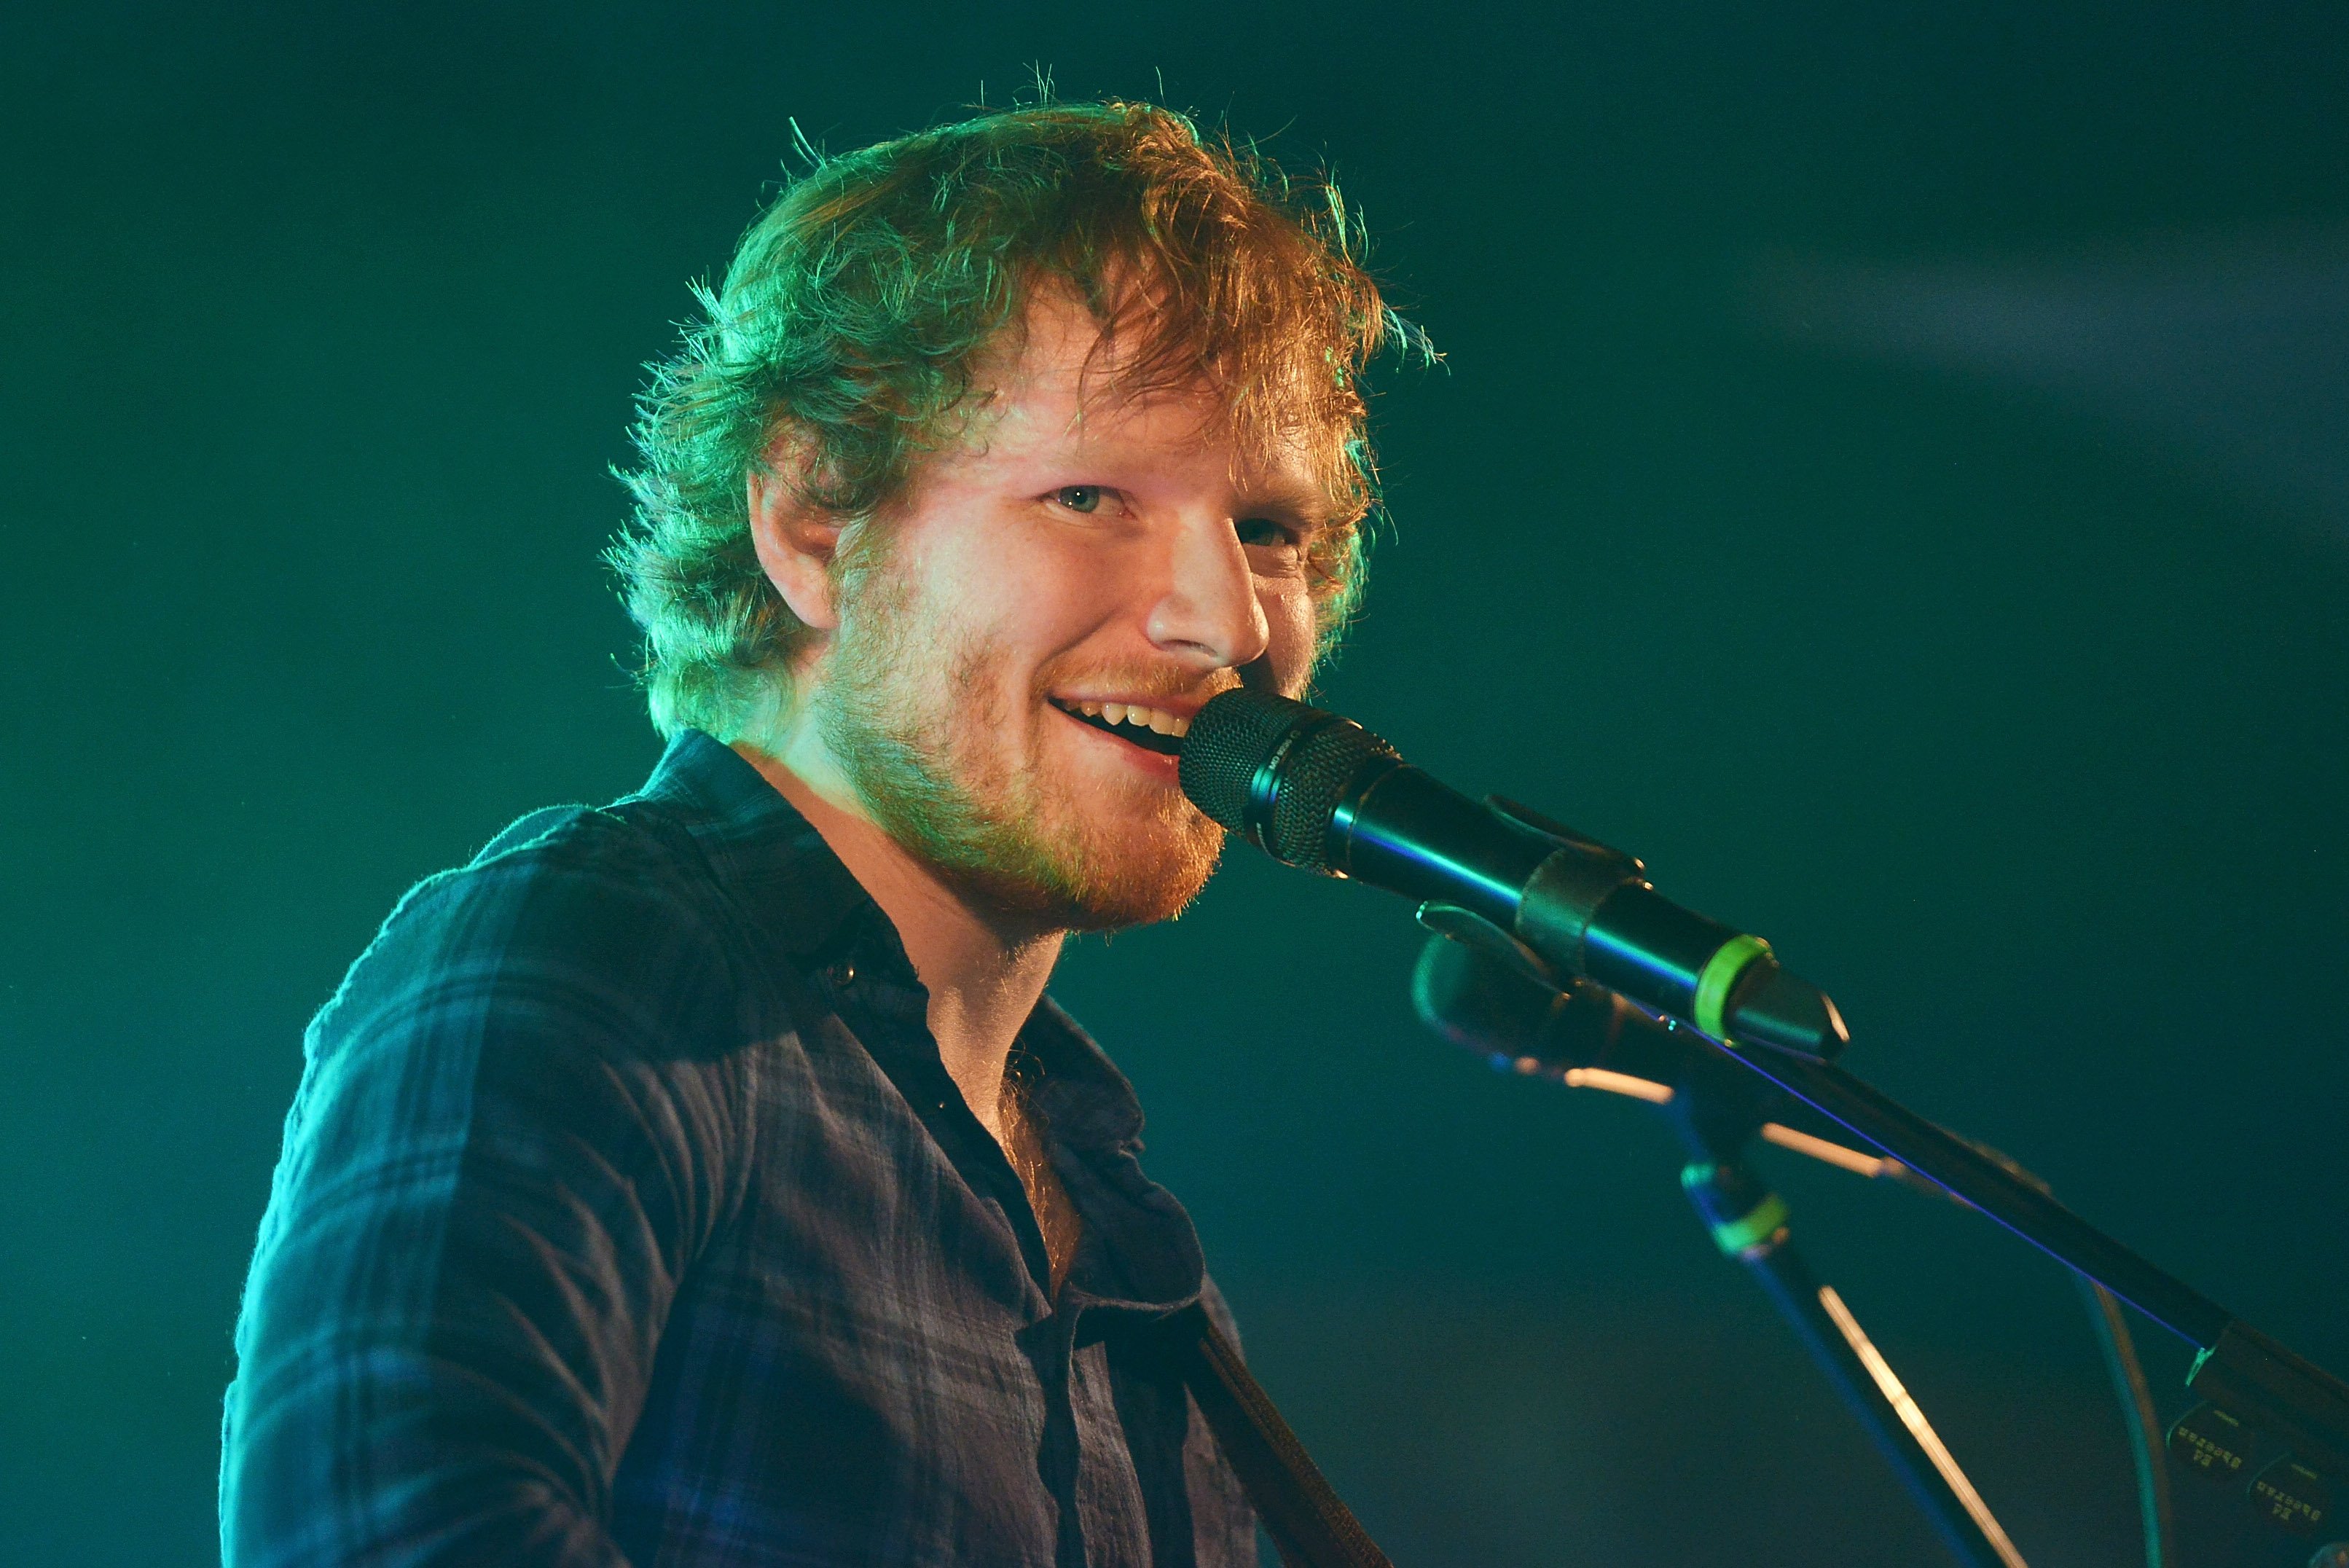 Ed Sheeran with a microphone during his "Photograph" era